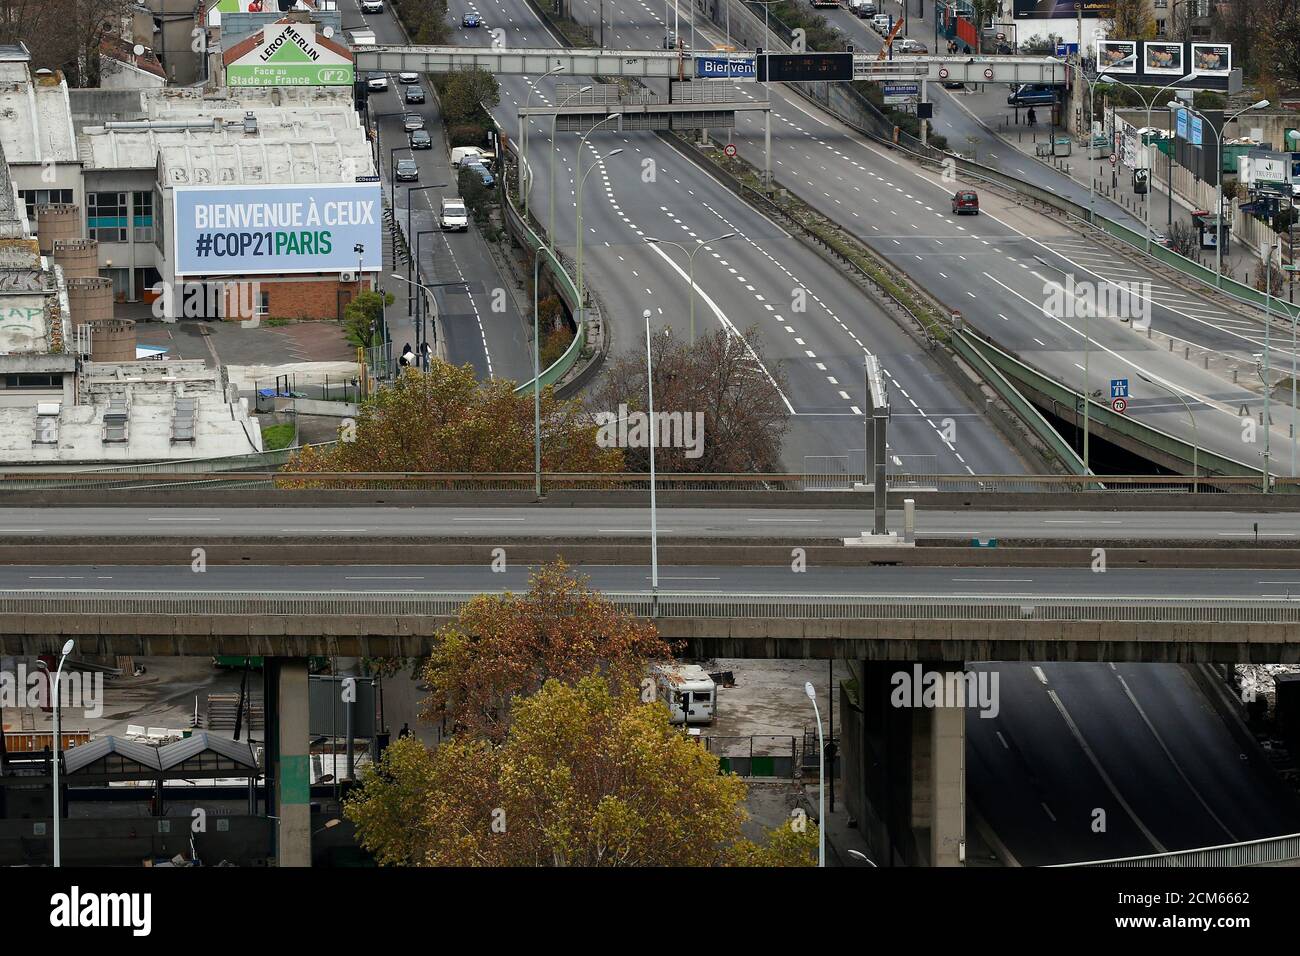 A view shows the Boulevard Peripherique (Paris' ring road) and the A1  motorway without traffic at Porte de la Chapelle in Paris, France, November  30, 2015 due to the opening day events